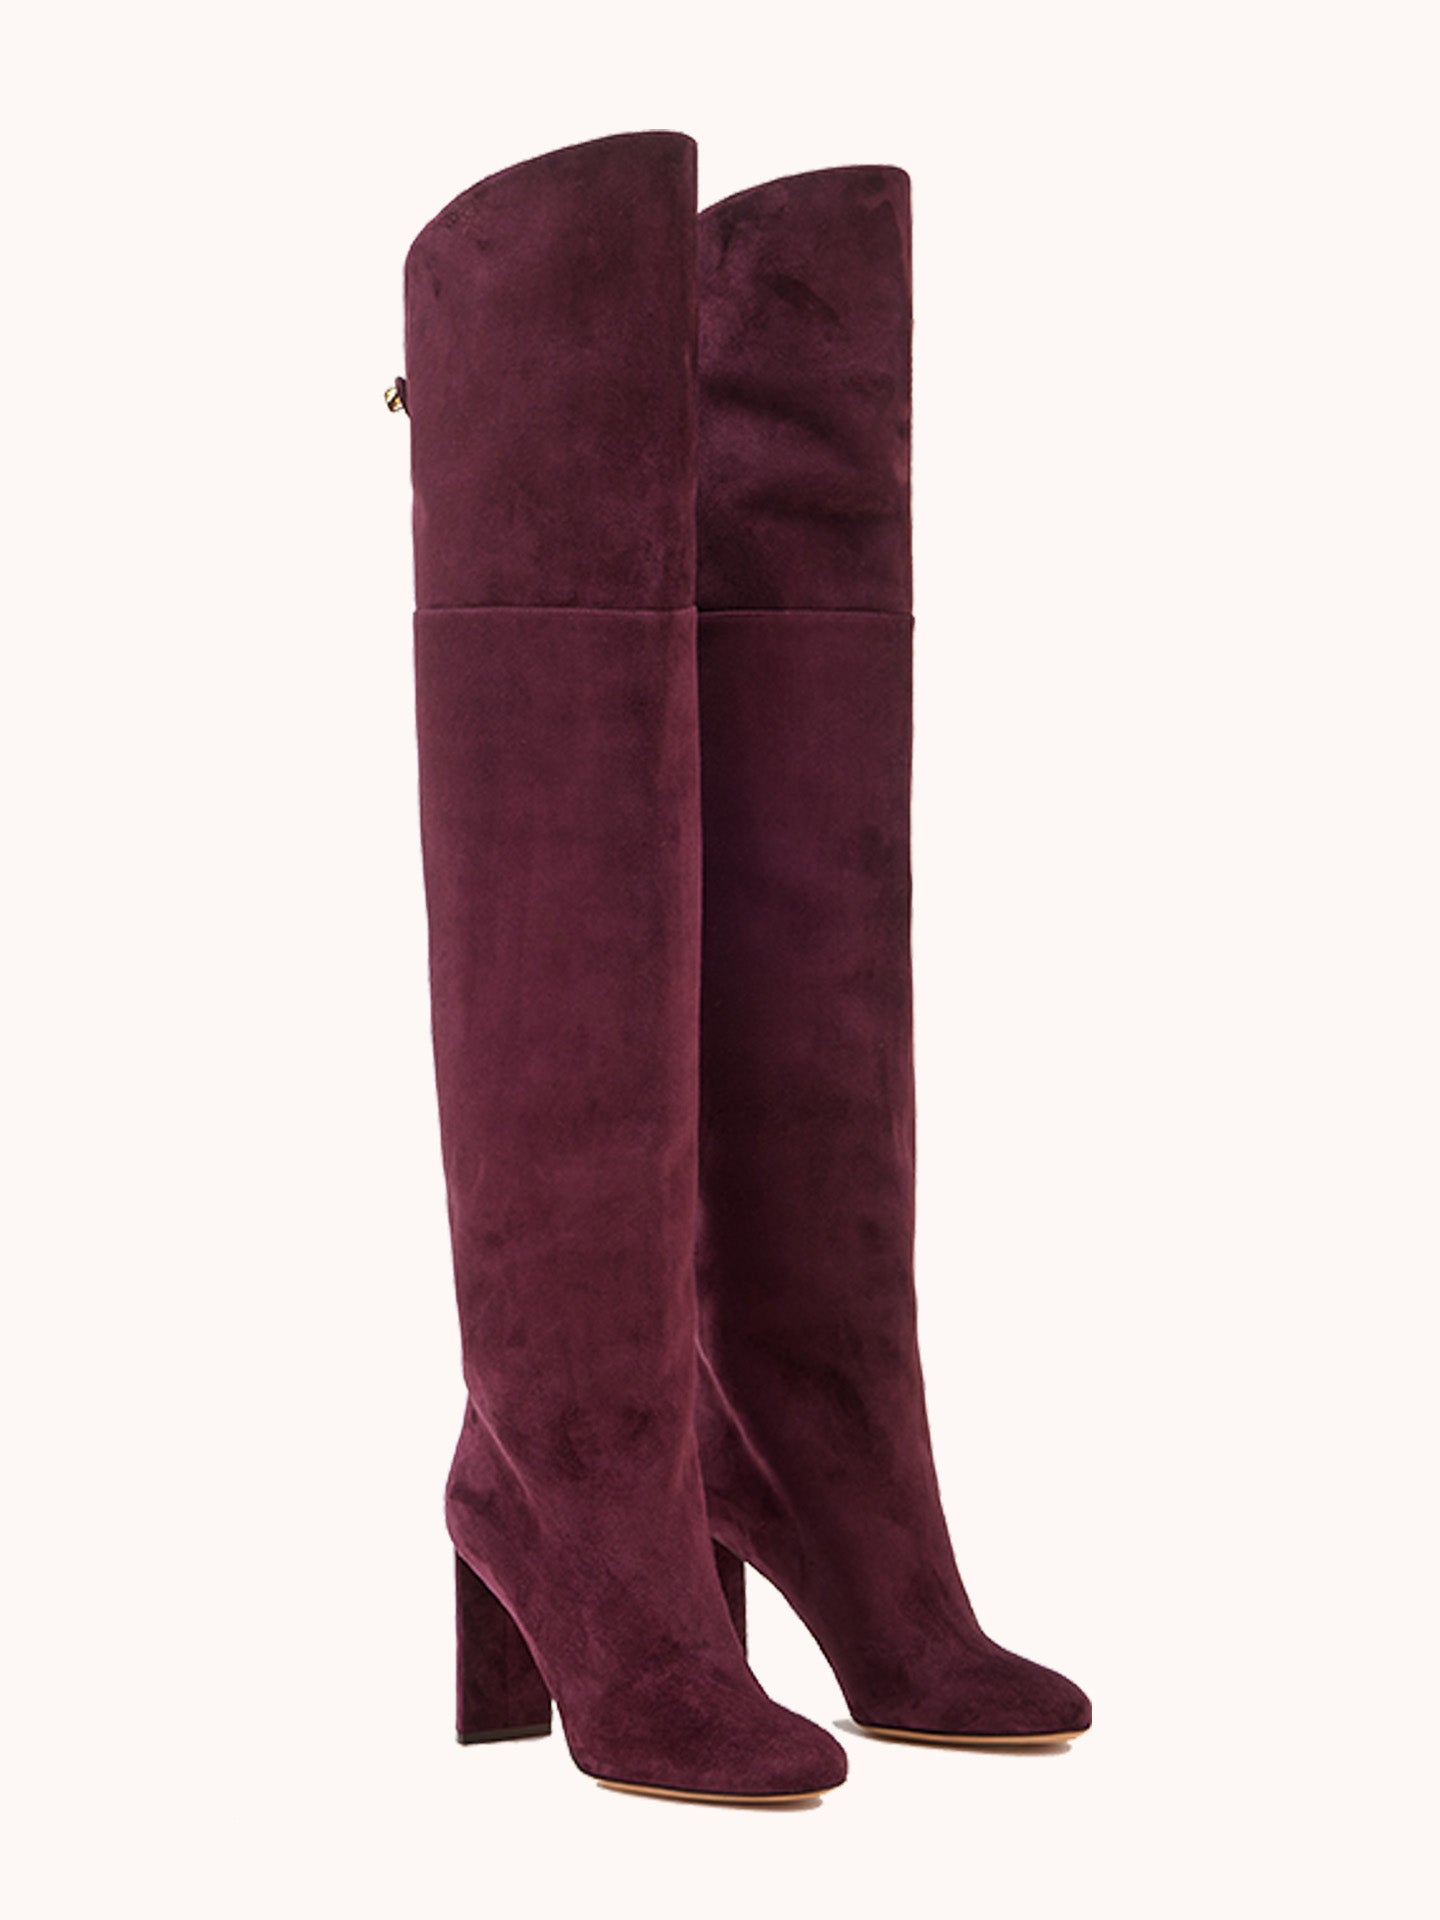 Marylin Over The Knee Aubergine Suede Boots